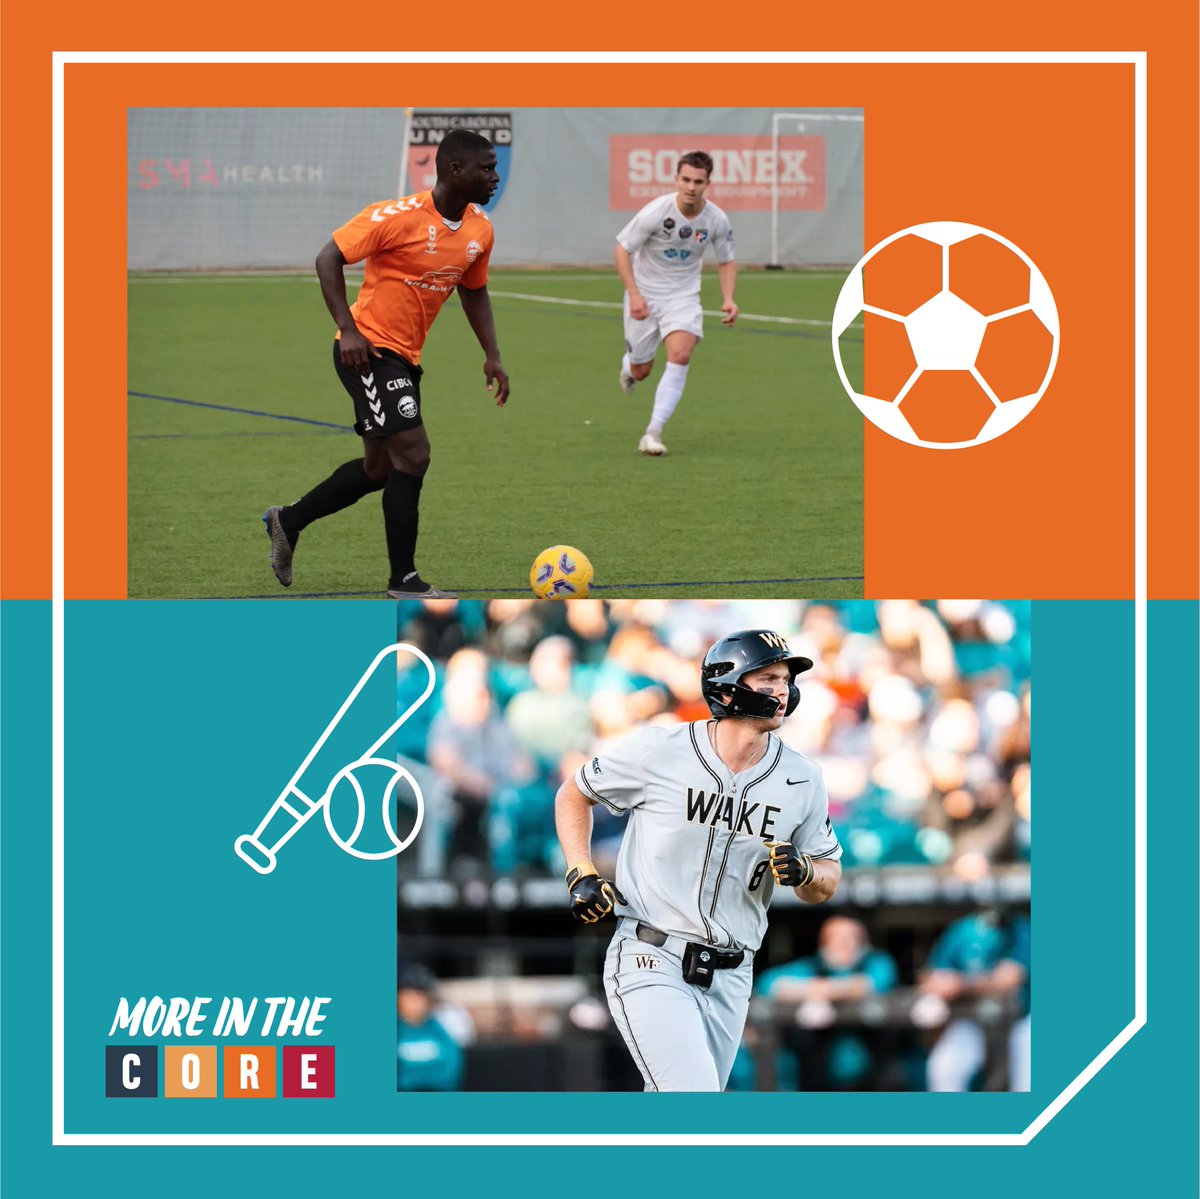 Ready to switch up the game? Go from the basketball courts to the soccer fields with our very own @CarolinaCore_FC, or hit the baseball diamond with @WakeBaseball or the @GSOHoppers. Living in the #CarolinaCore offers ample opportunities for a great game.